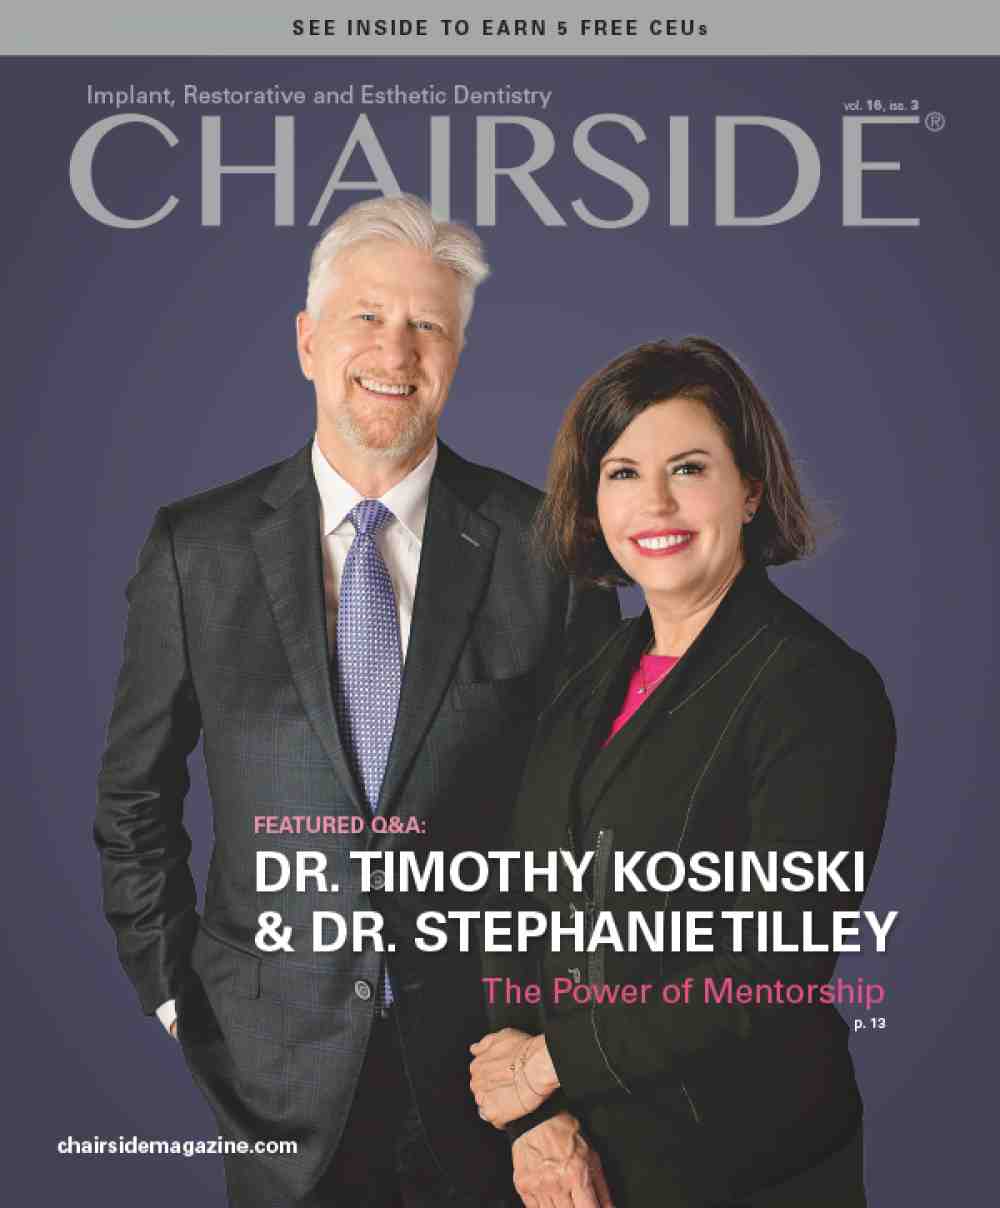 Latest “Chairside” Magazine Published by Glidewell Spotlights the Power of Mentorship in Adding New Services to the Dental Practice